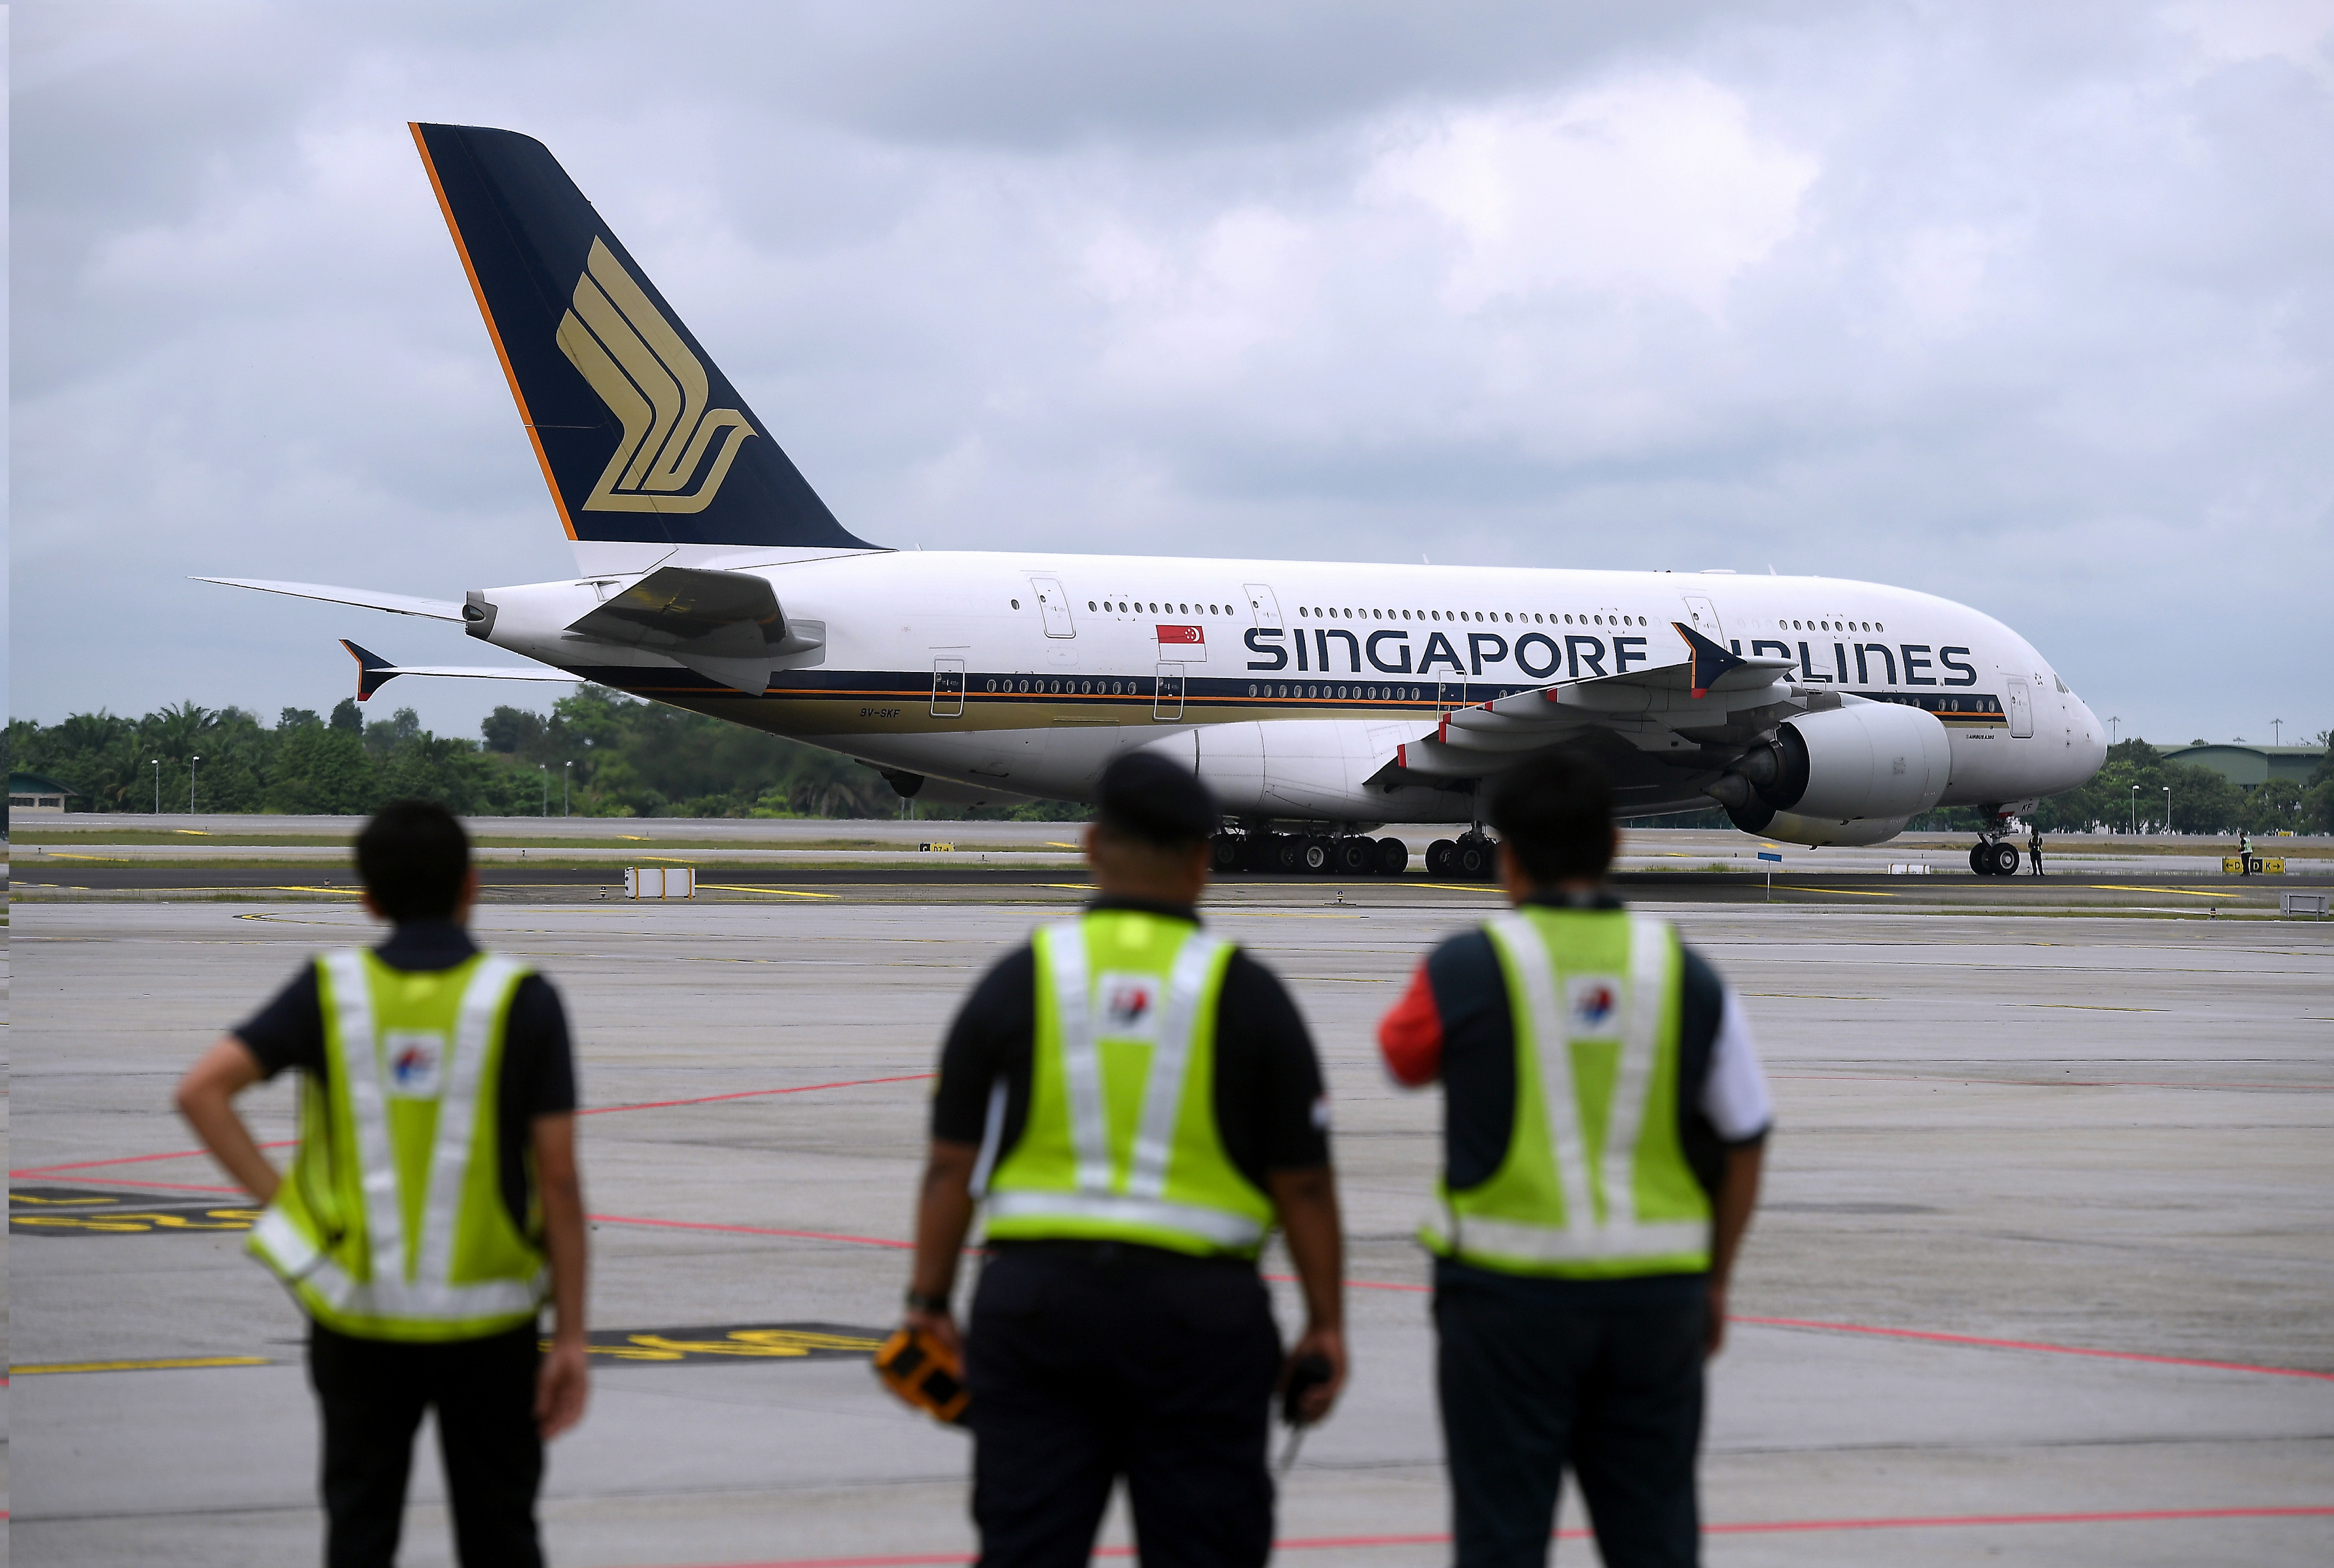 Covid-19: Singapore Airlines sells out meals on parked plane – new business model to make up for lost revenues